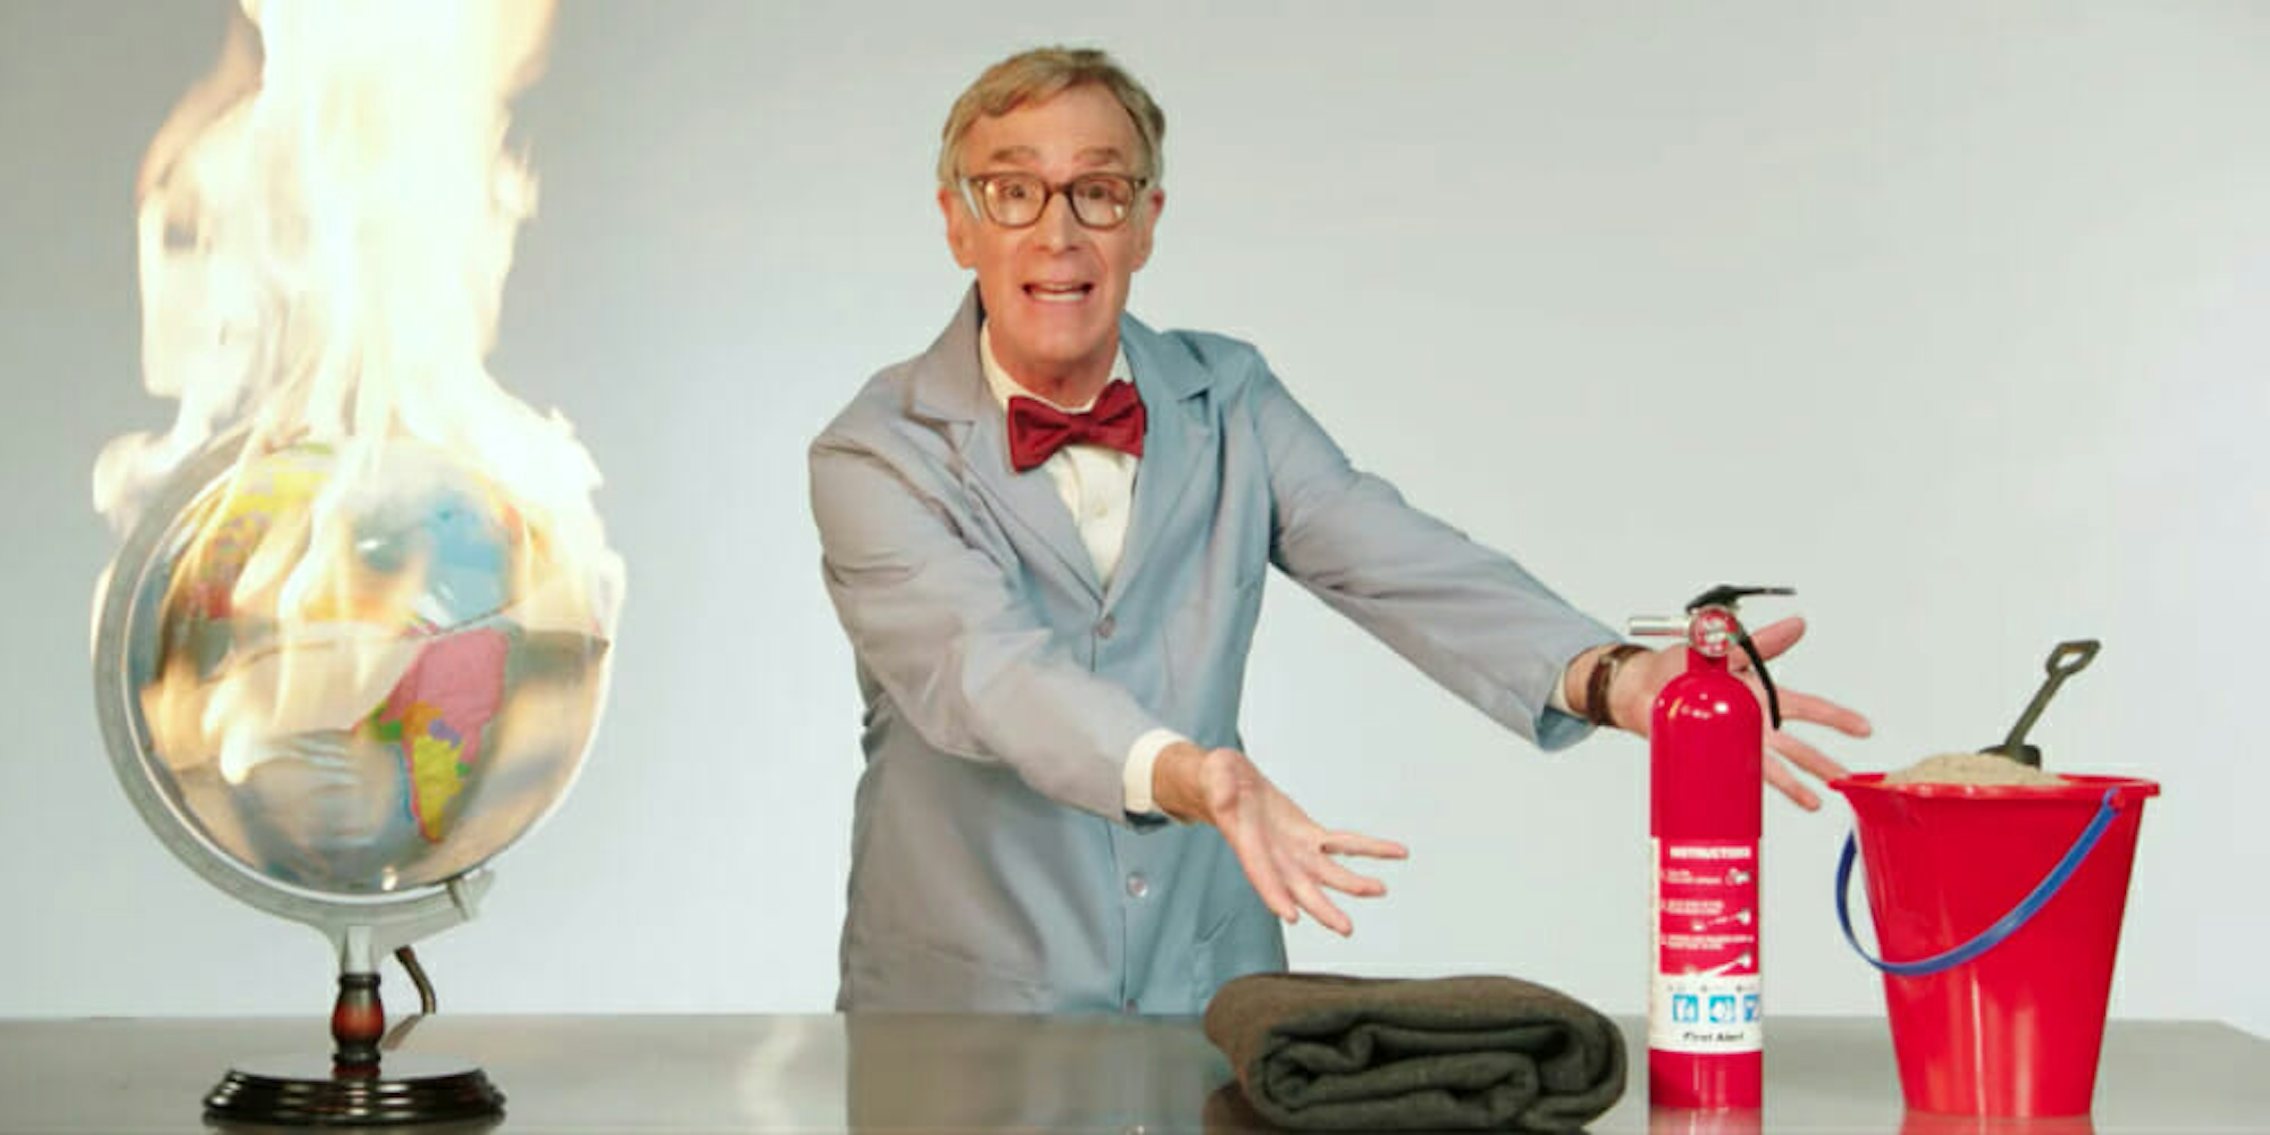 bill-nye-goes-on-expletive-filled-rant-about-climate-change